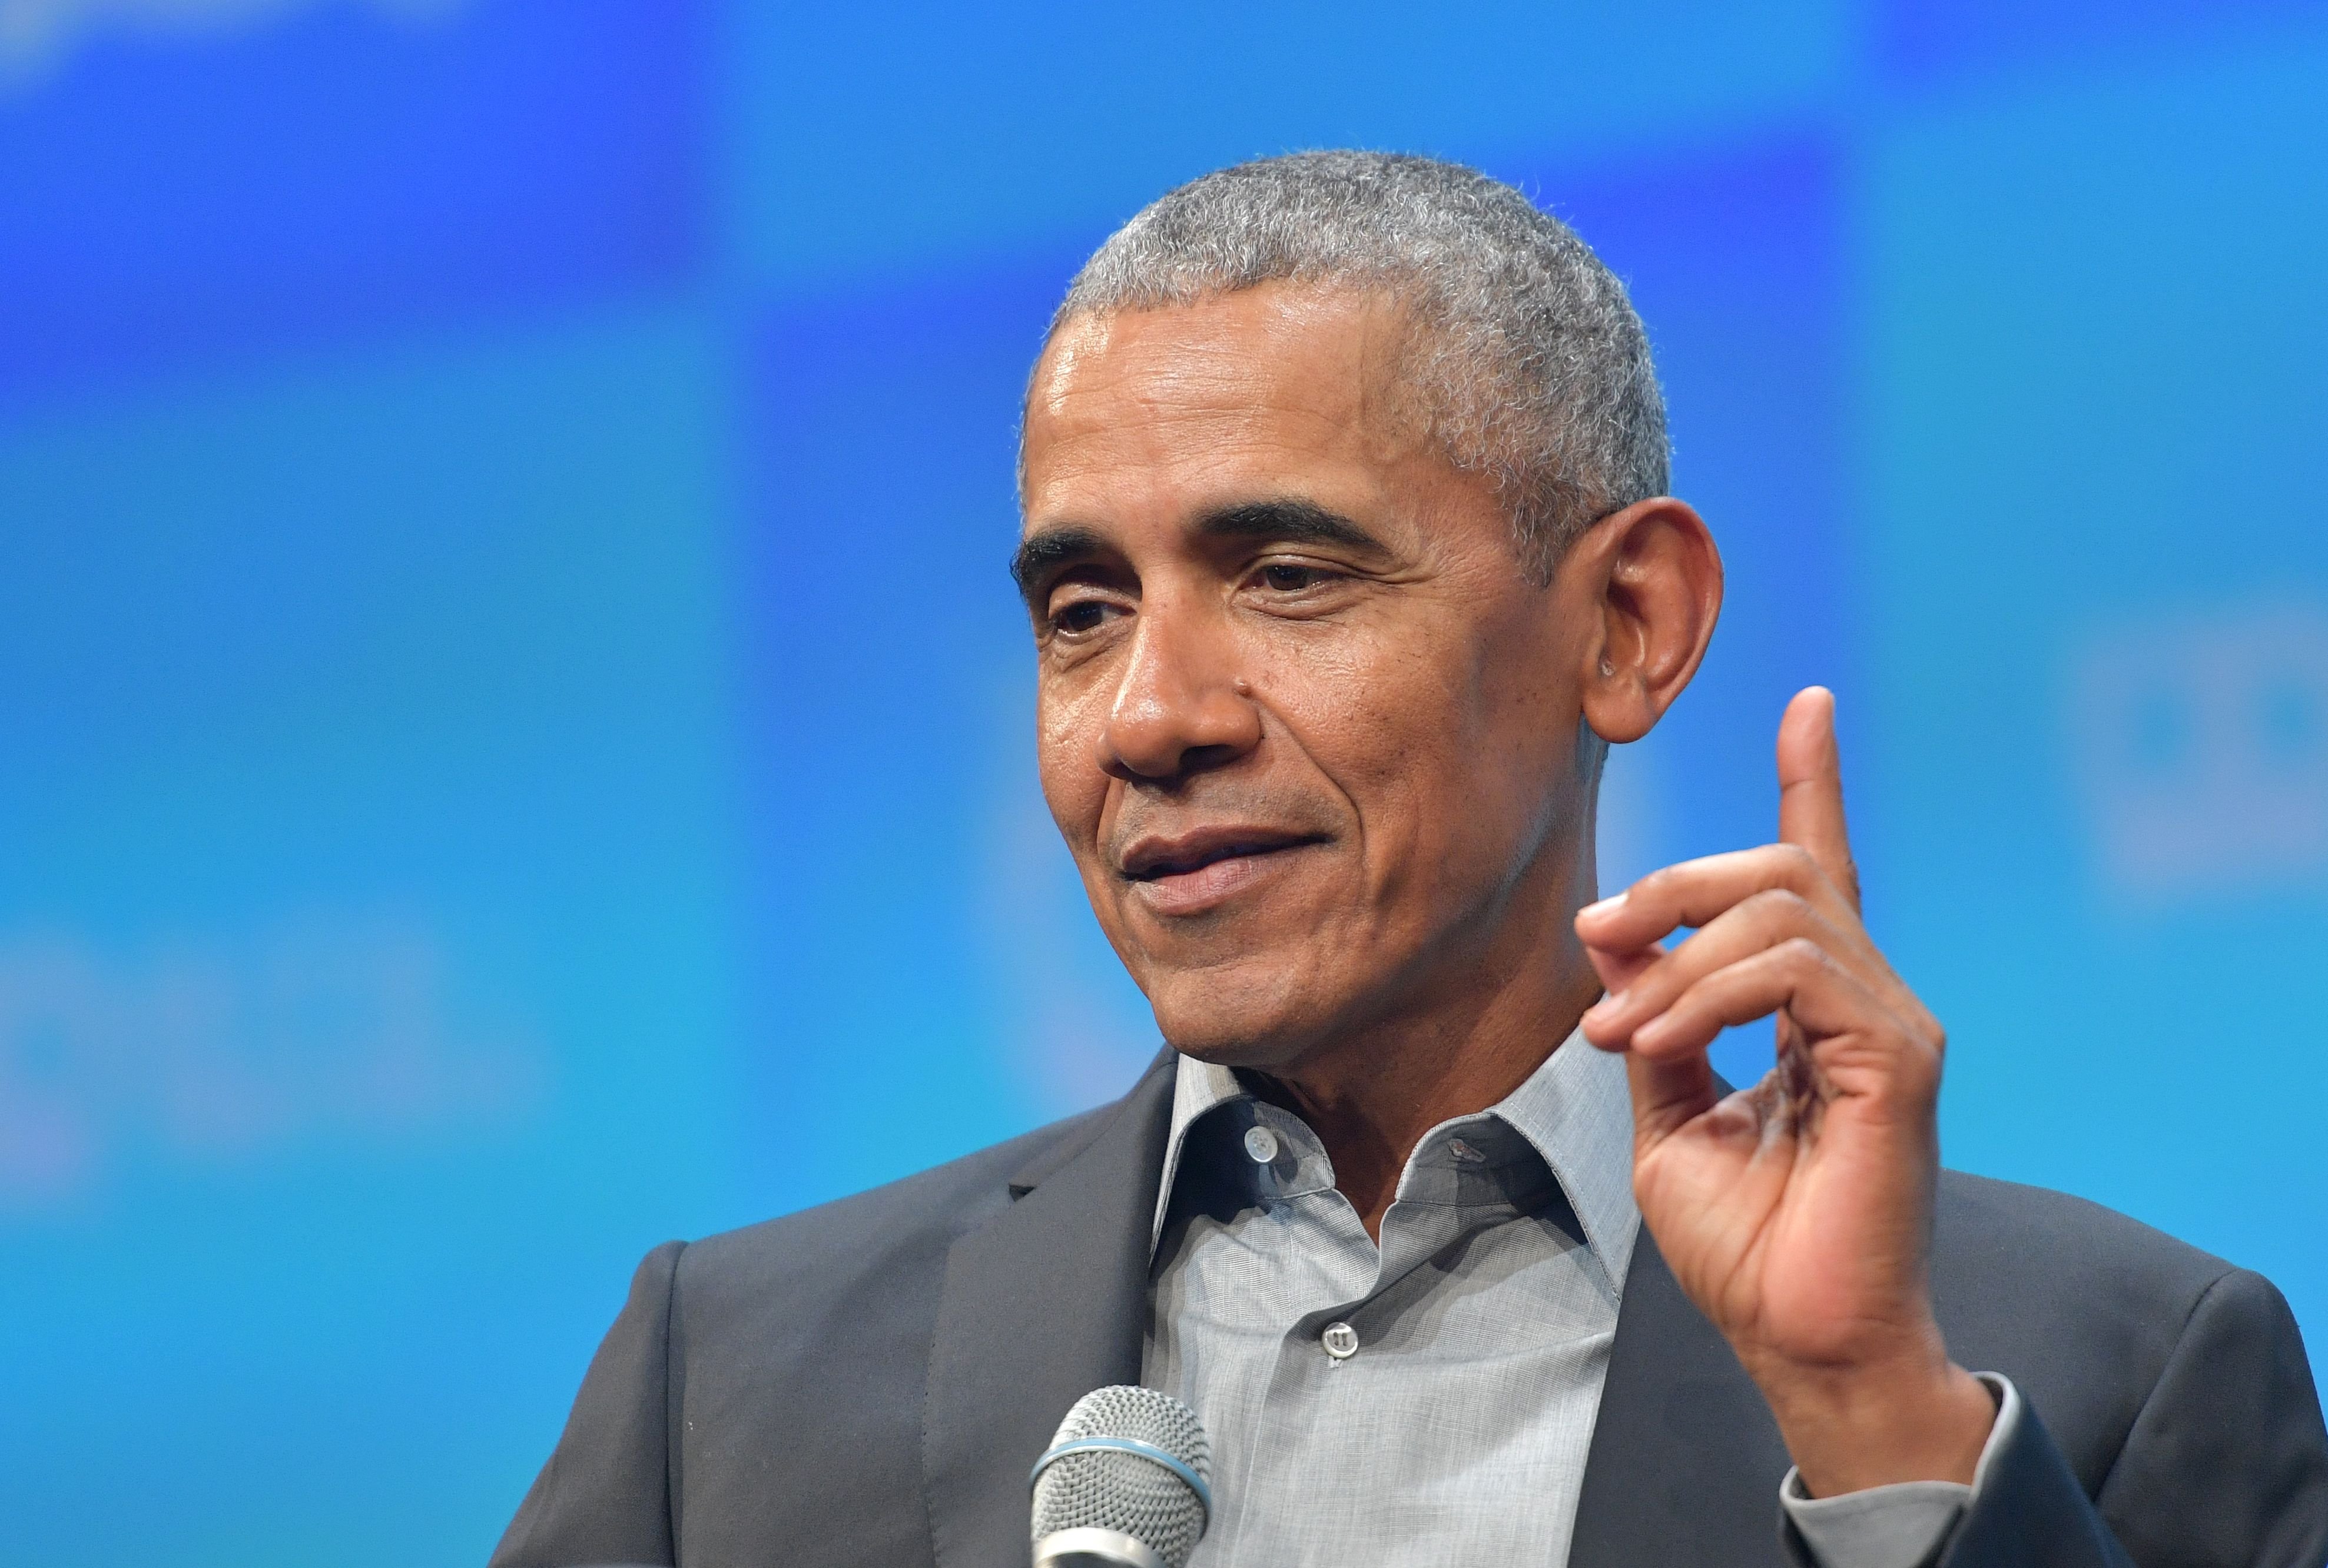 Barack Obama during the Bits & Pretzels meetup on September 29, 2019 in Munich, Germany. | Source: Getty Images